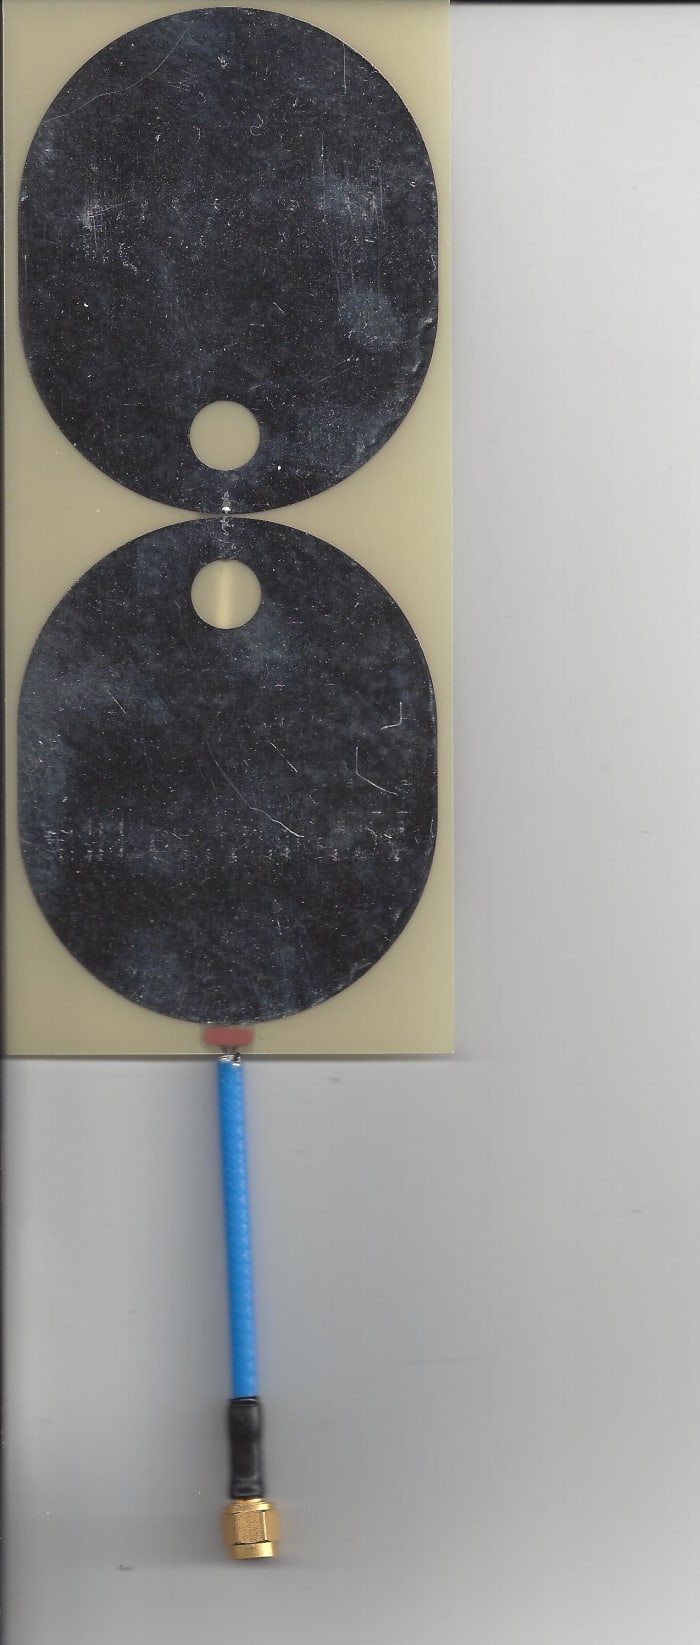 How to Build Your Own Planar Disk Antenna - TurboFuture